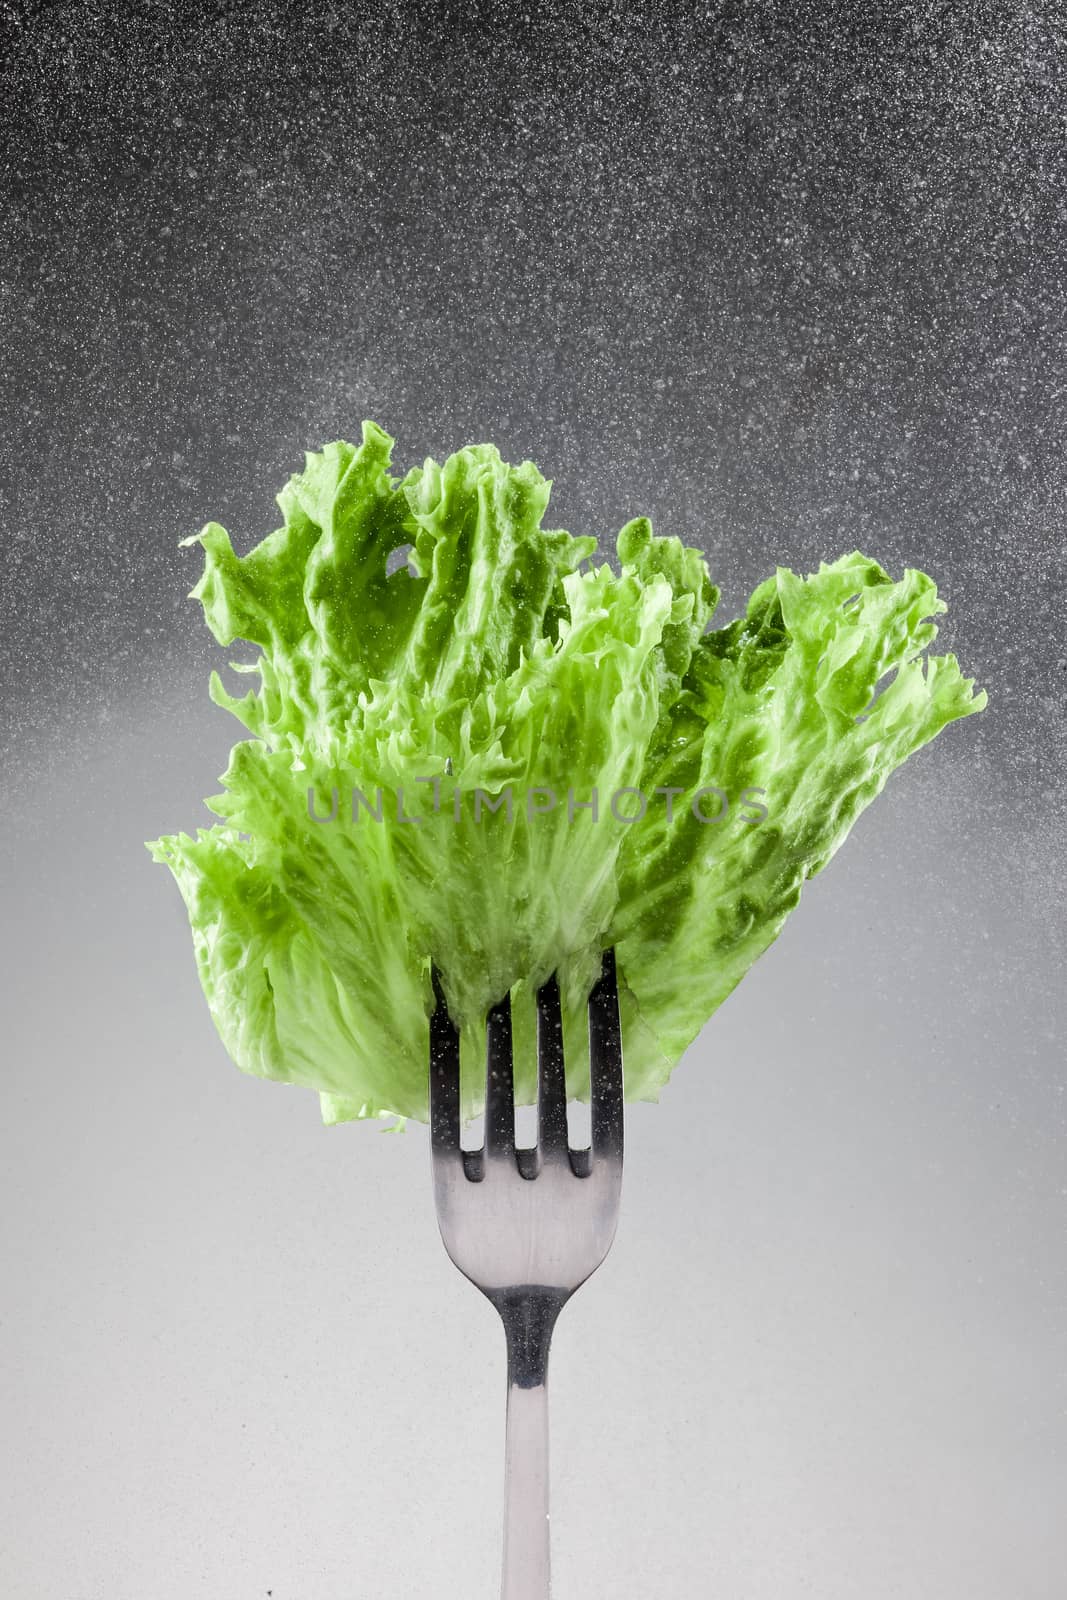 Green lettuce leaves on a fork  by master1305